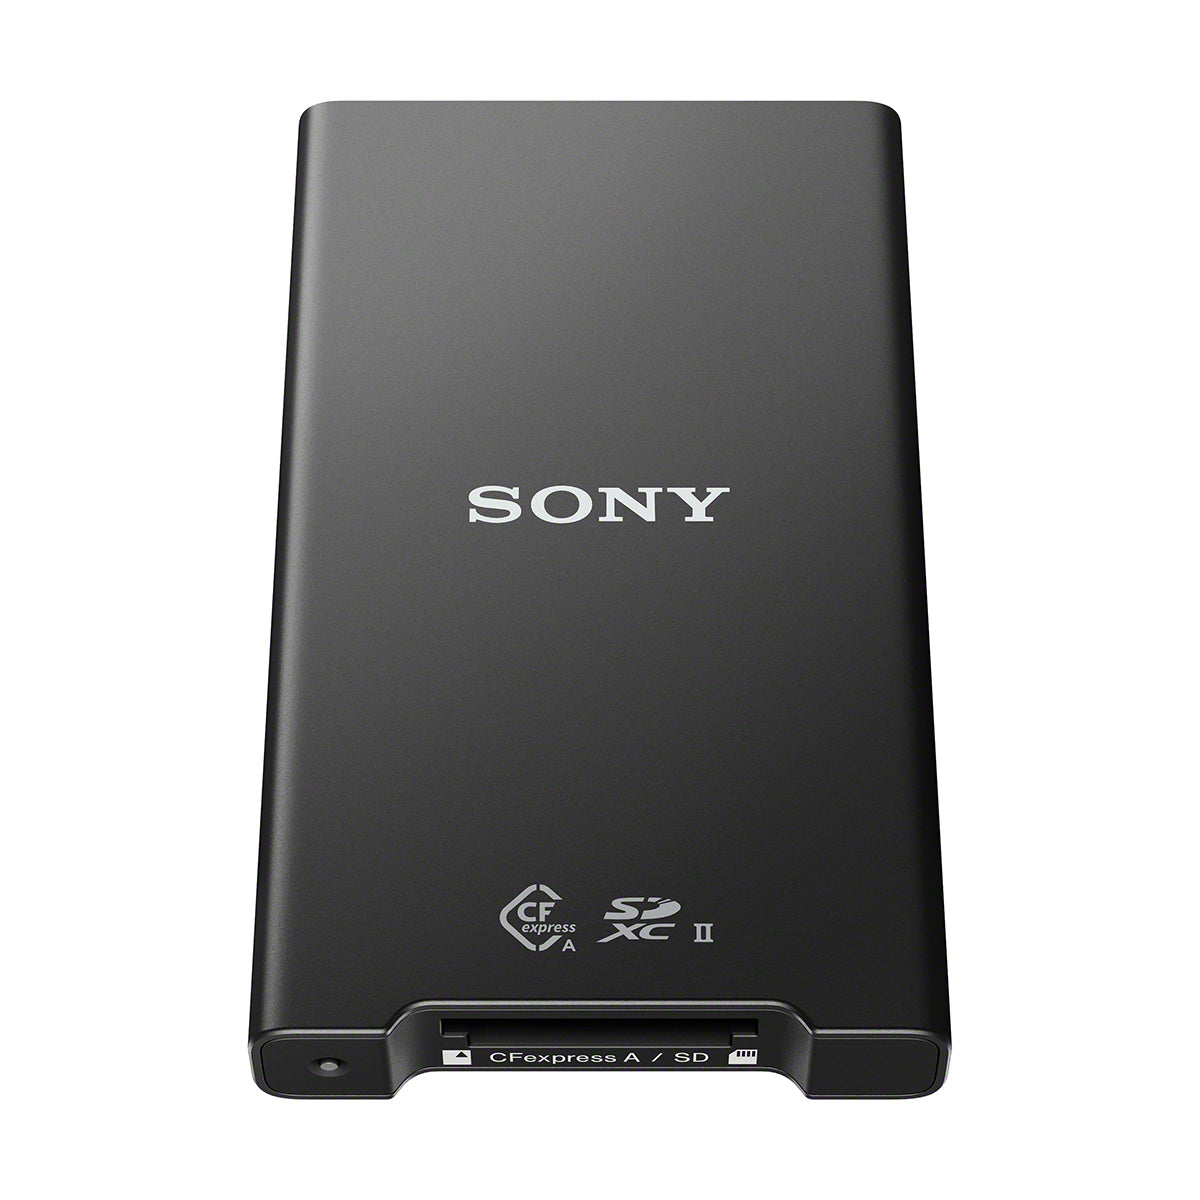 Sony CFexpress Type A / SD Memory Card Reader